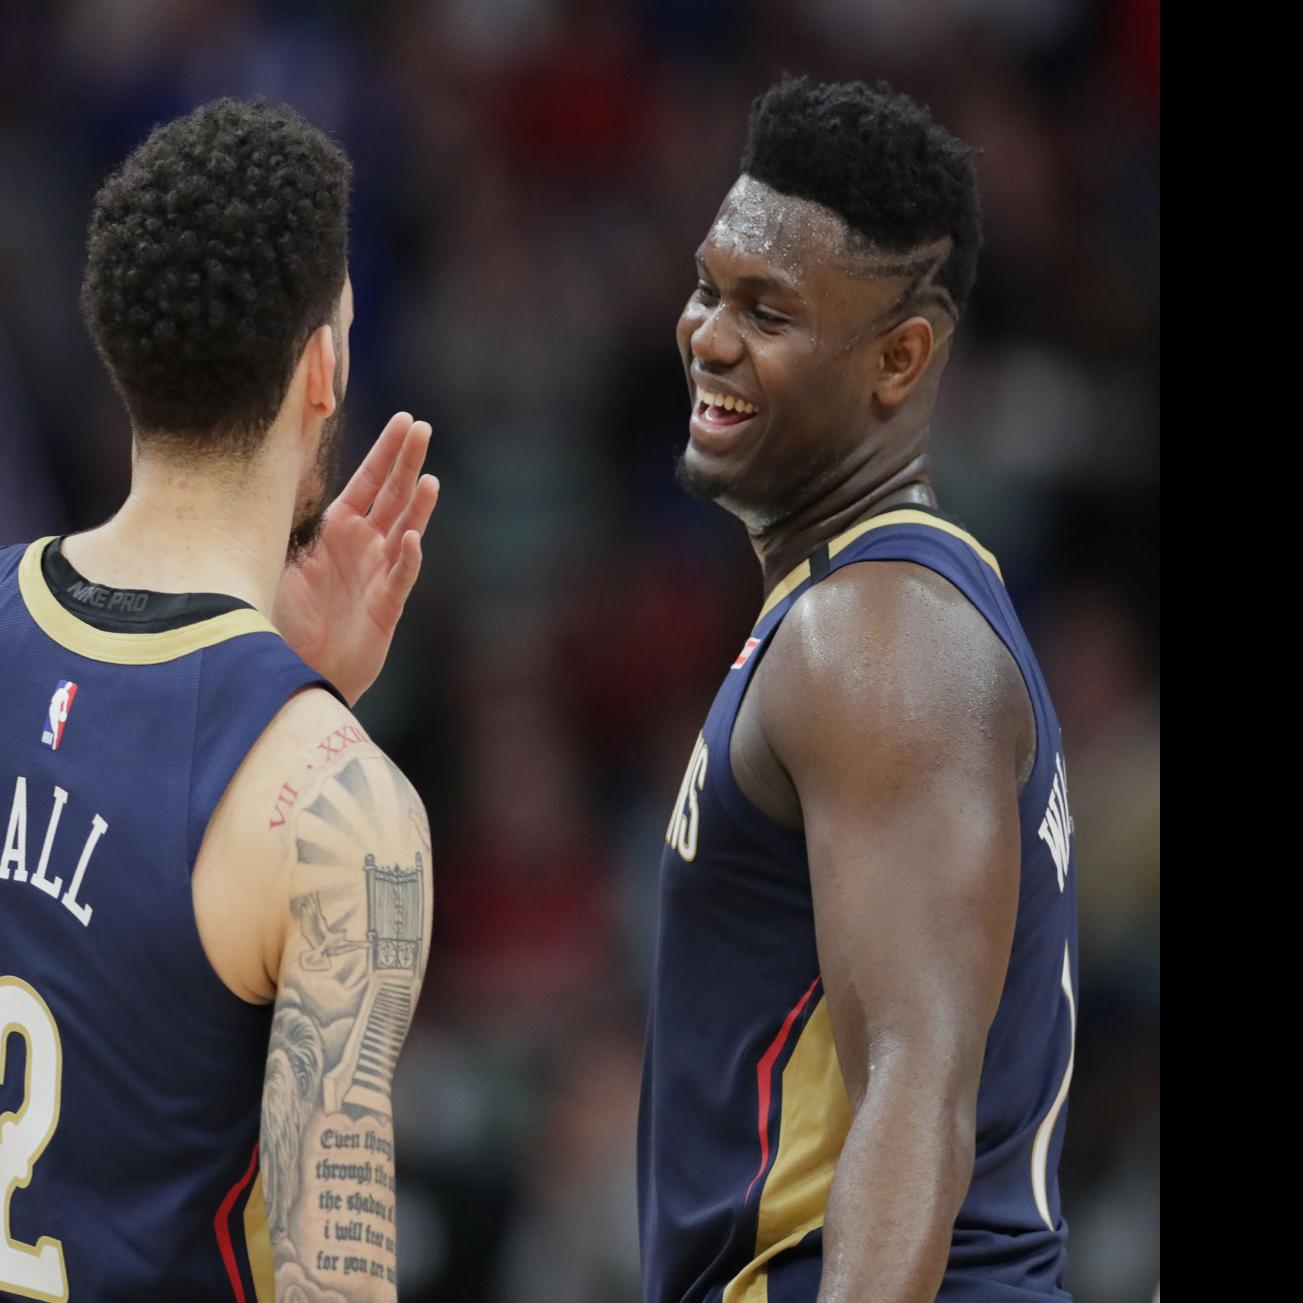 Walker Pelicans In Pursuit Of Grizzlies And Crowded Field Have Favorable Schedule On Their Side Down Stretch Pelicans Nola Com